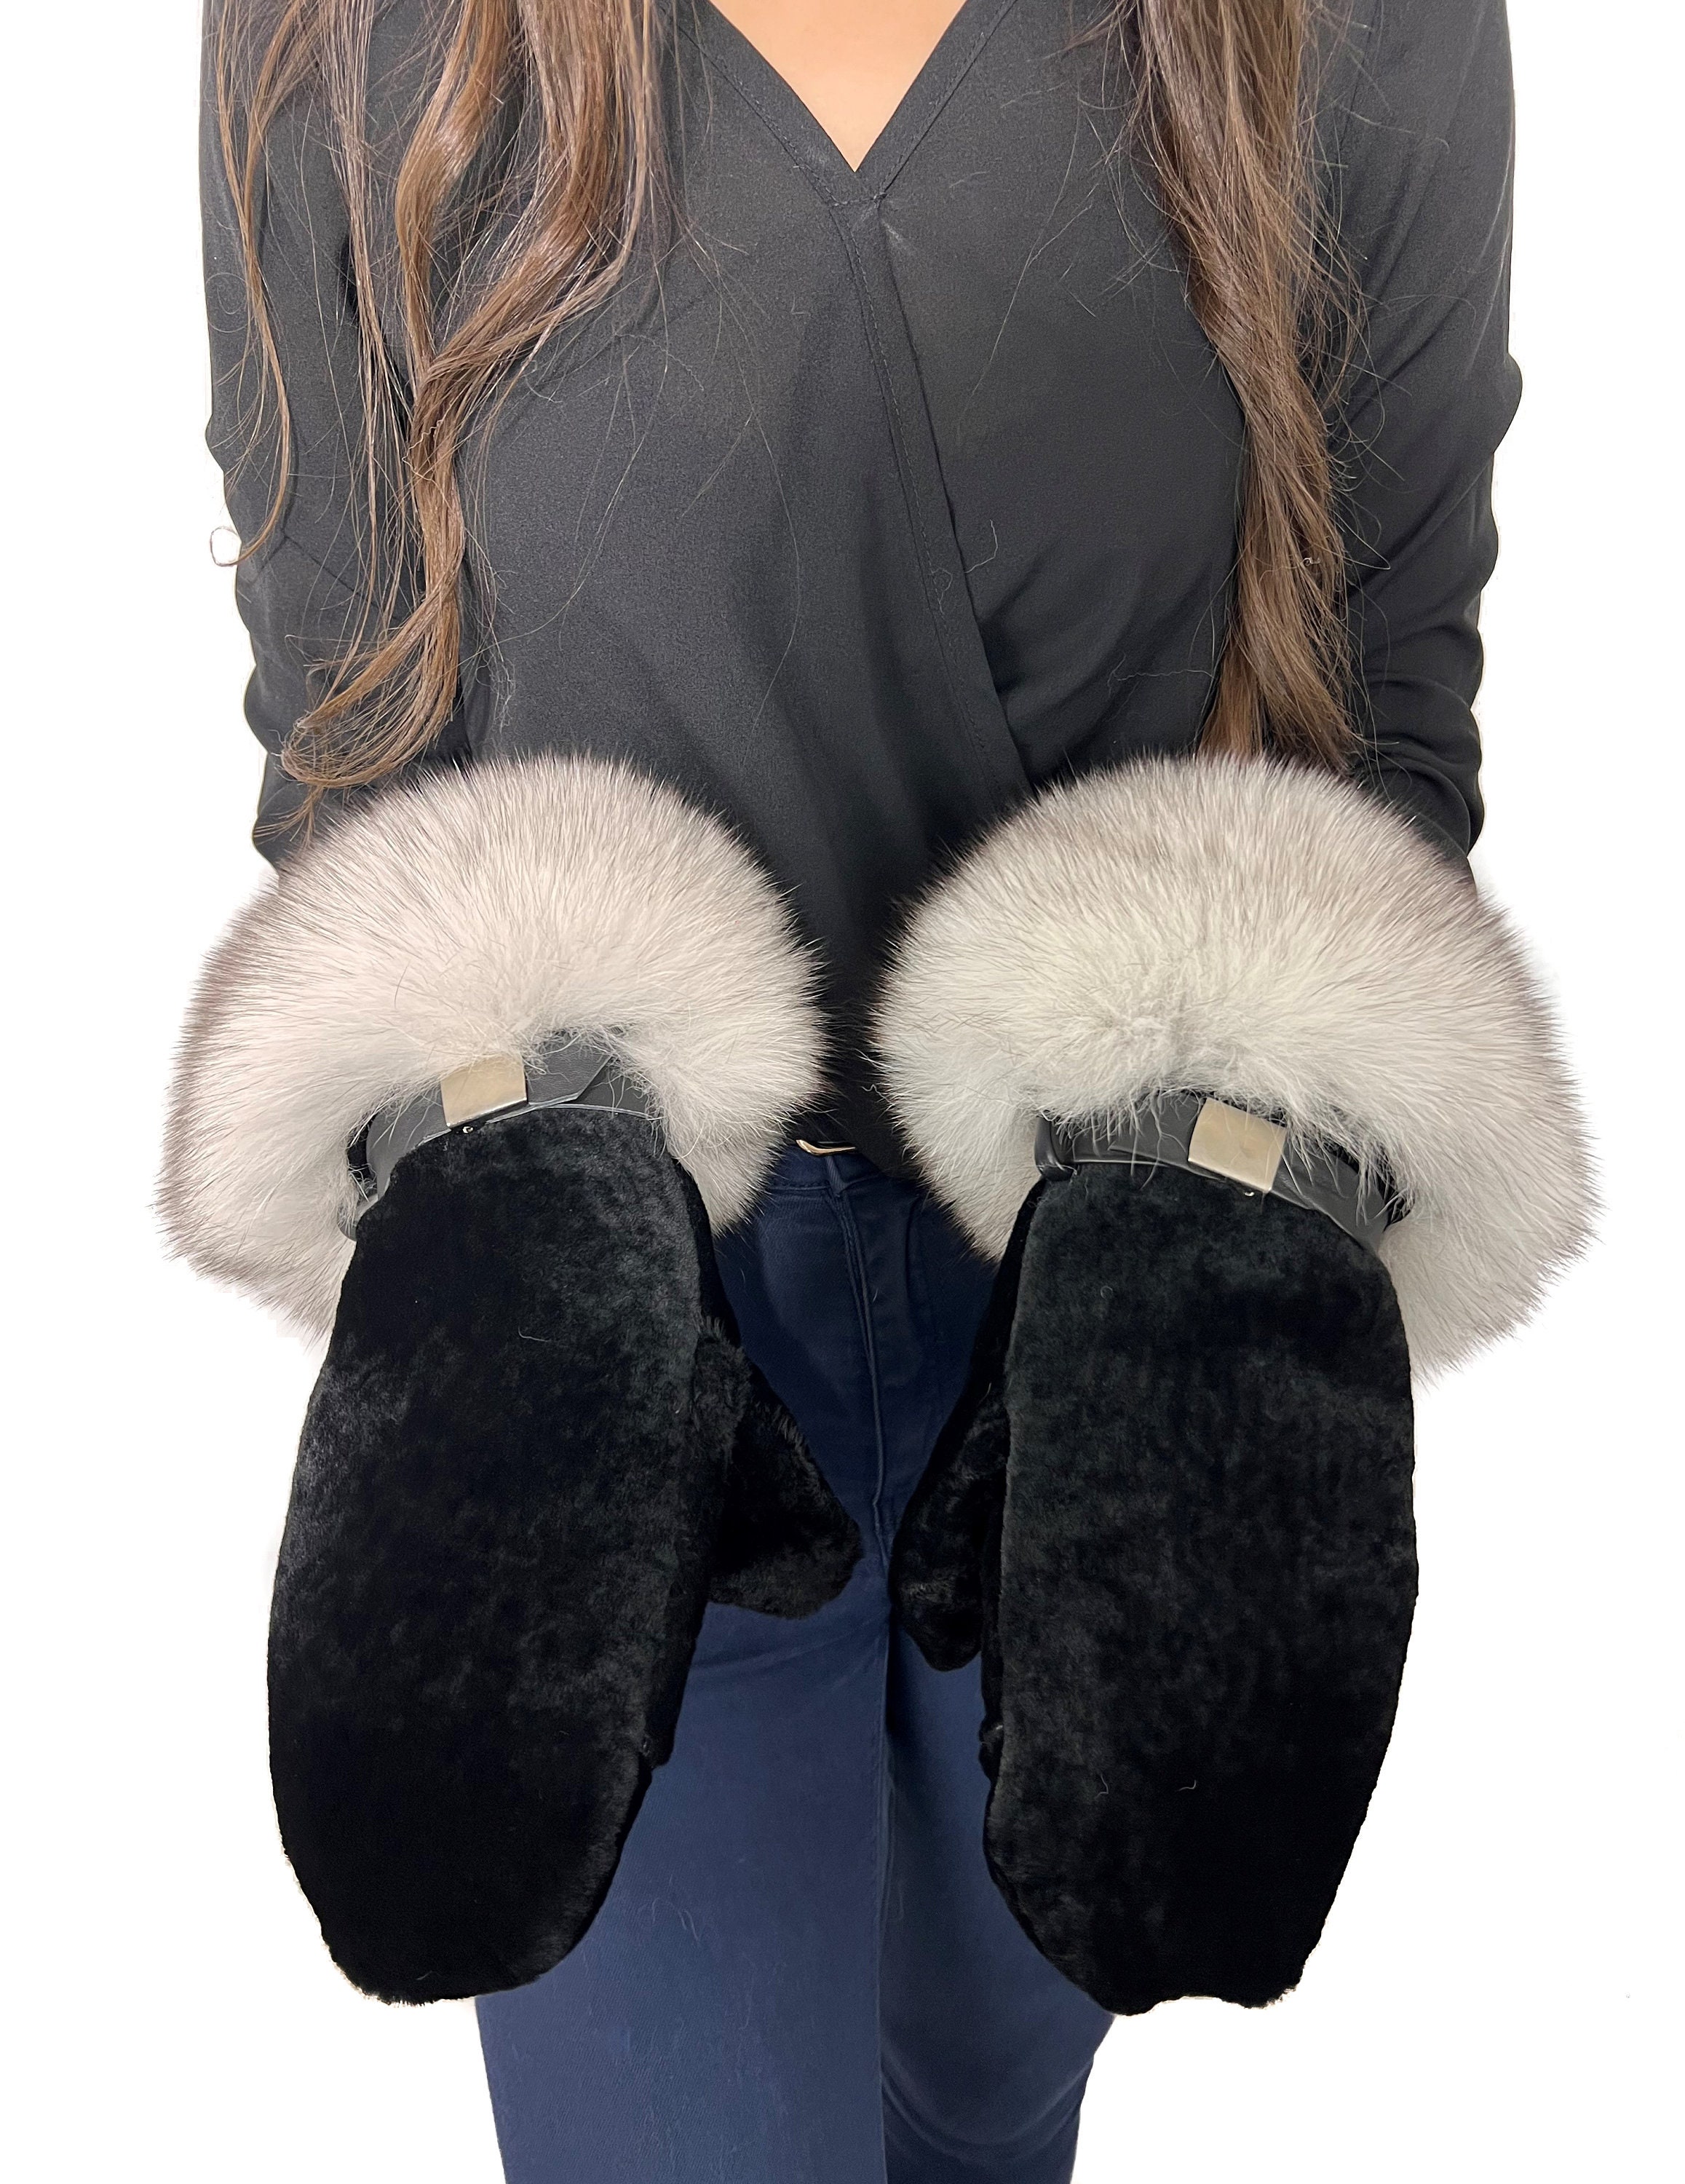 Fox Fur Mittens With Sheared Beaver on Palm Saga Furs Natural White Fox and  Beaver Gloves 